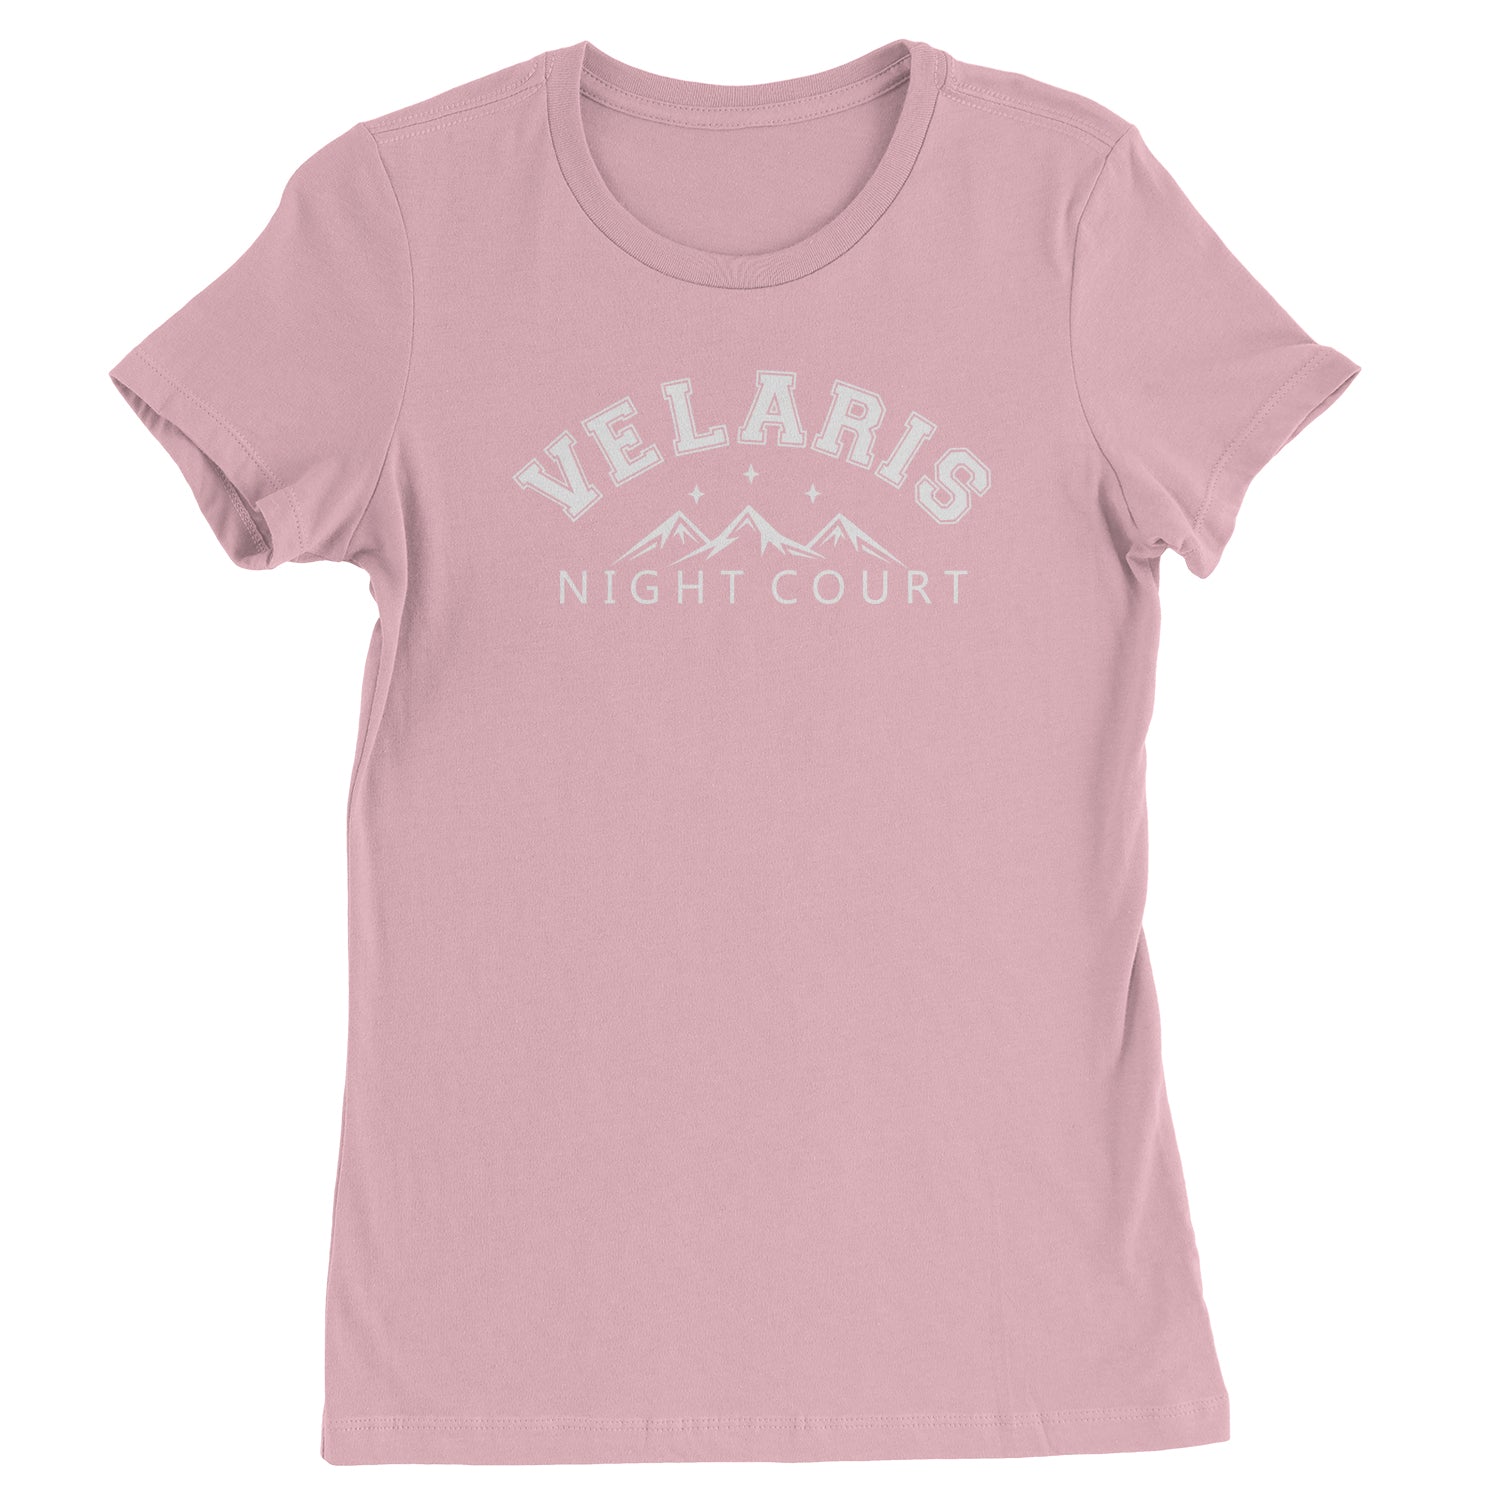 Velaris Night Court Squad Womens T-shirt acotar, court, illyrian, maas, of, thorns by Expression Tees